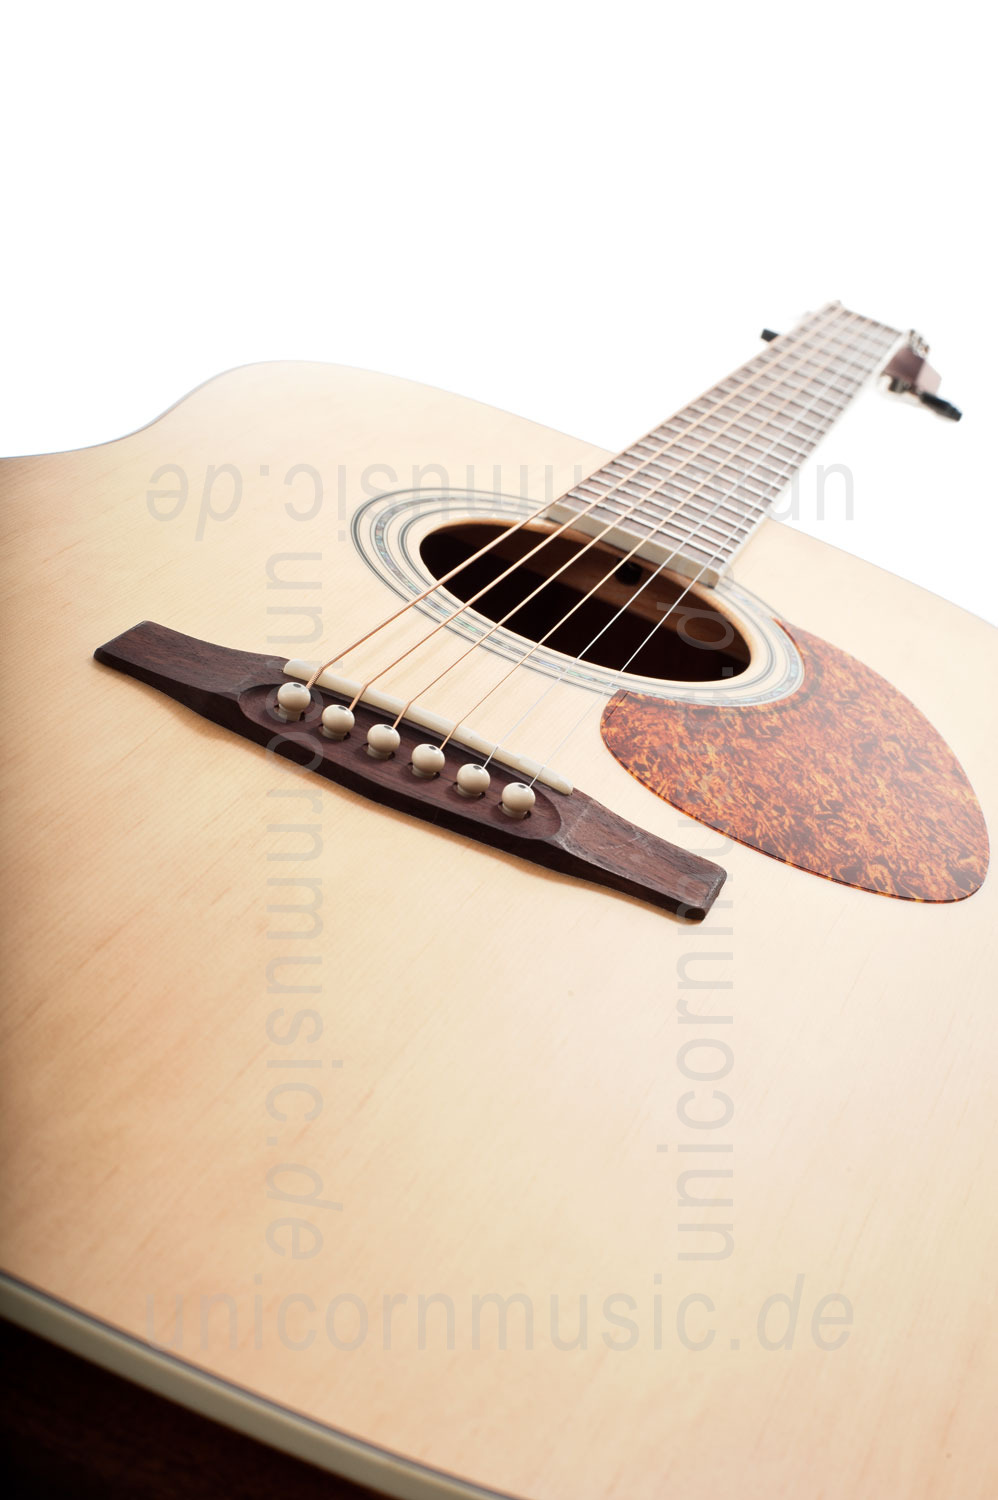 to article description / price Acoustic Guitar CORT EARTH 100 NS - Dreadnought - solid spruce top